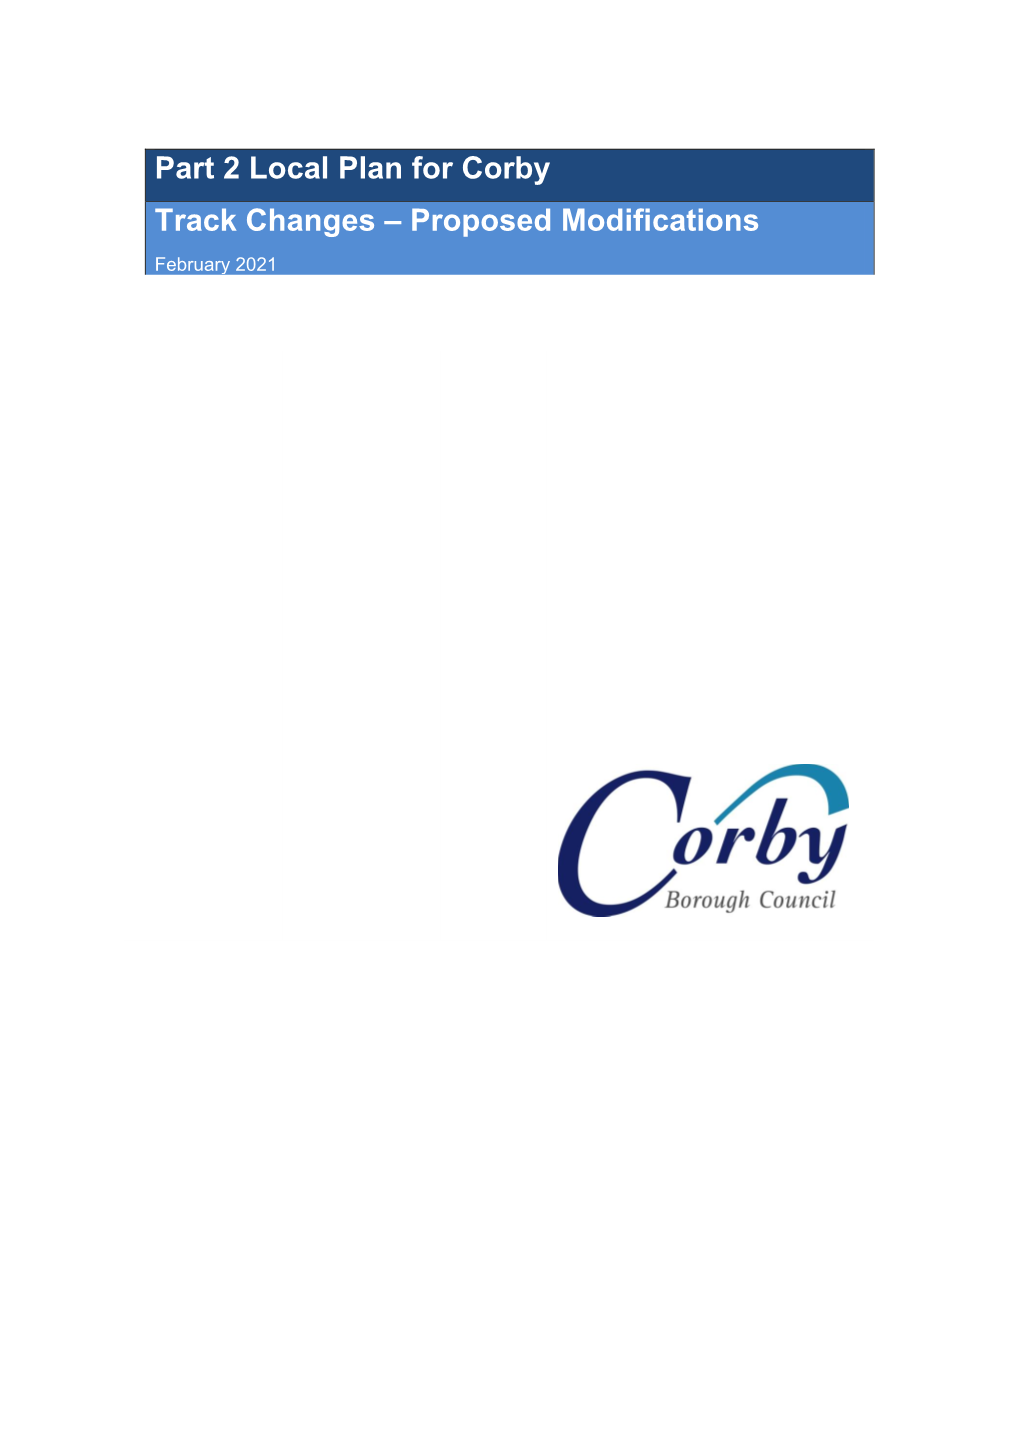 Part 2 Local Plan for Corby Track Changes